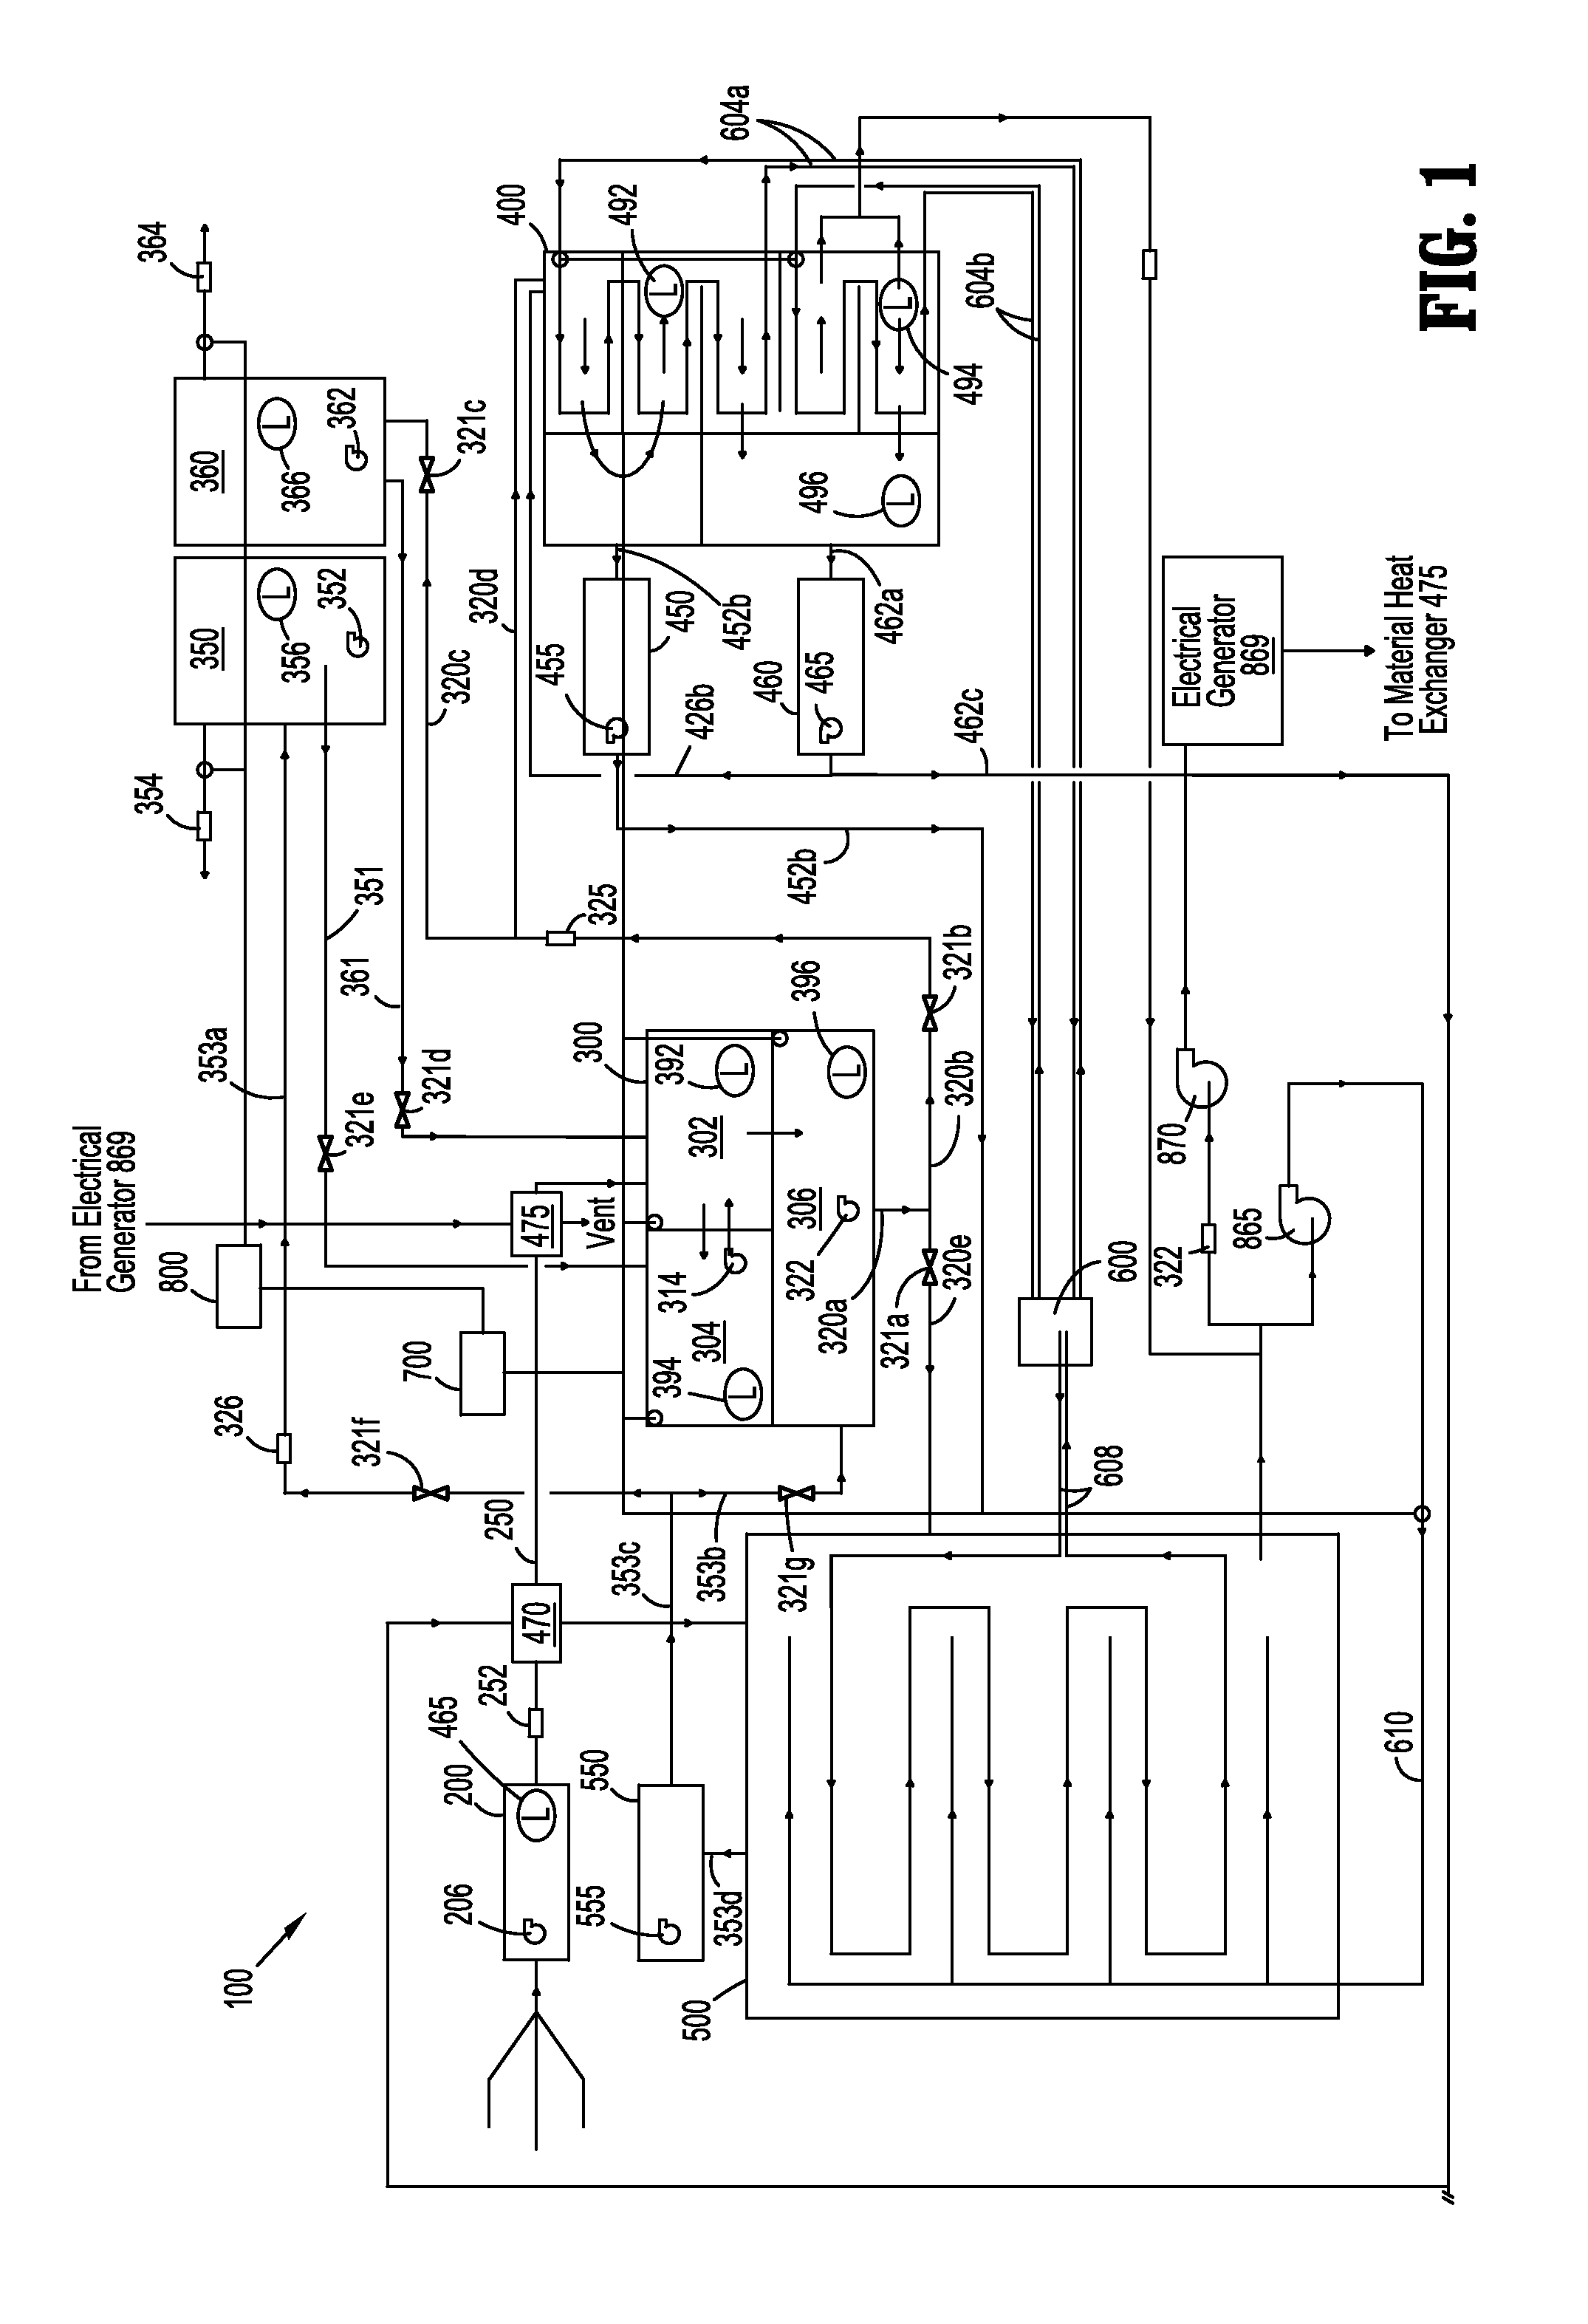 Systems and methods for anaerobic digestion of biomaterials